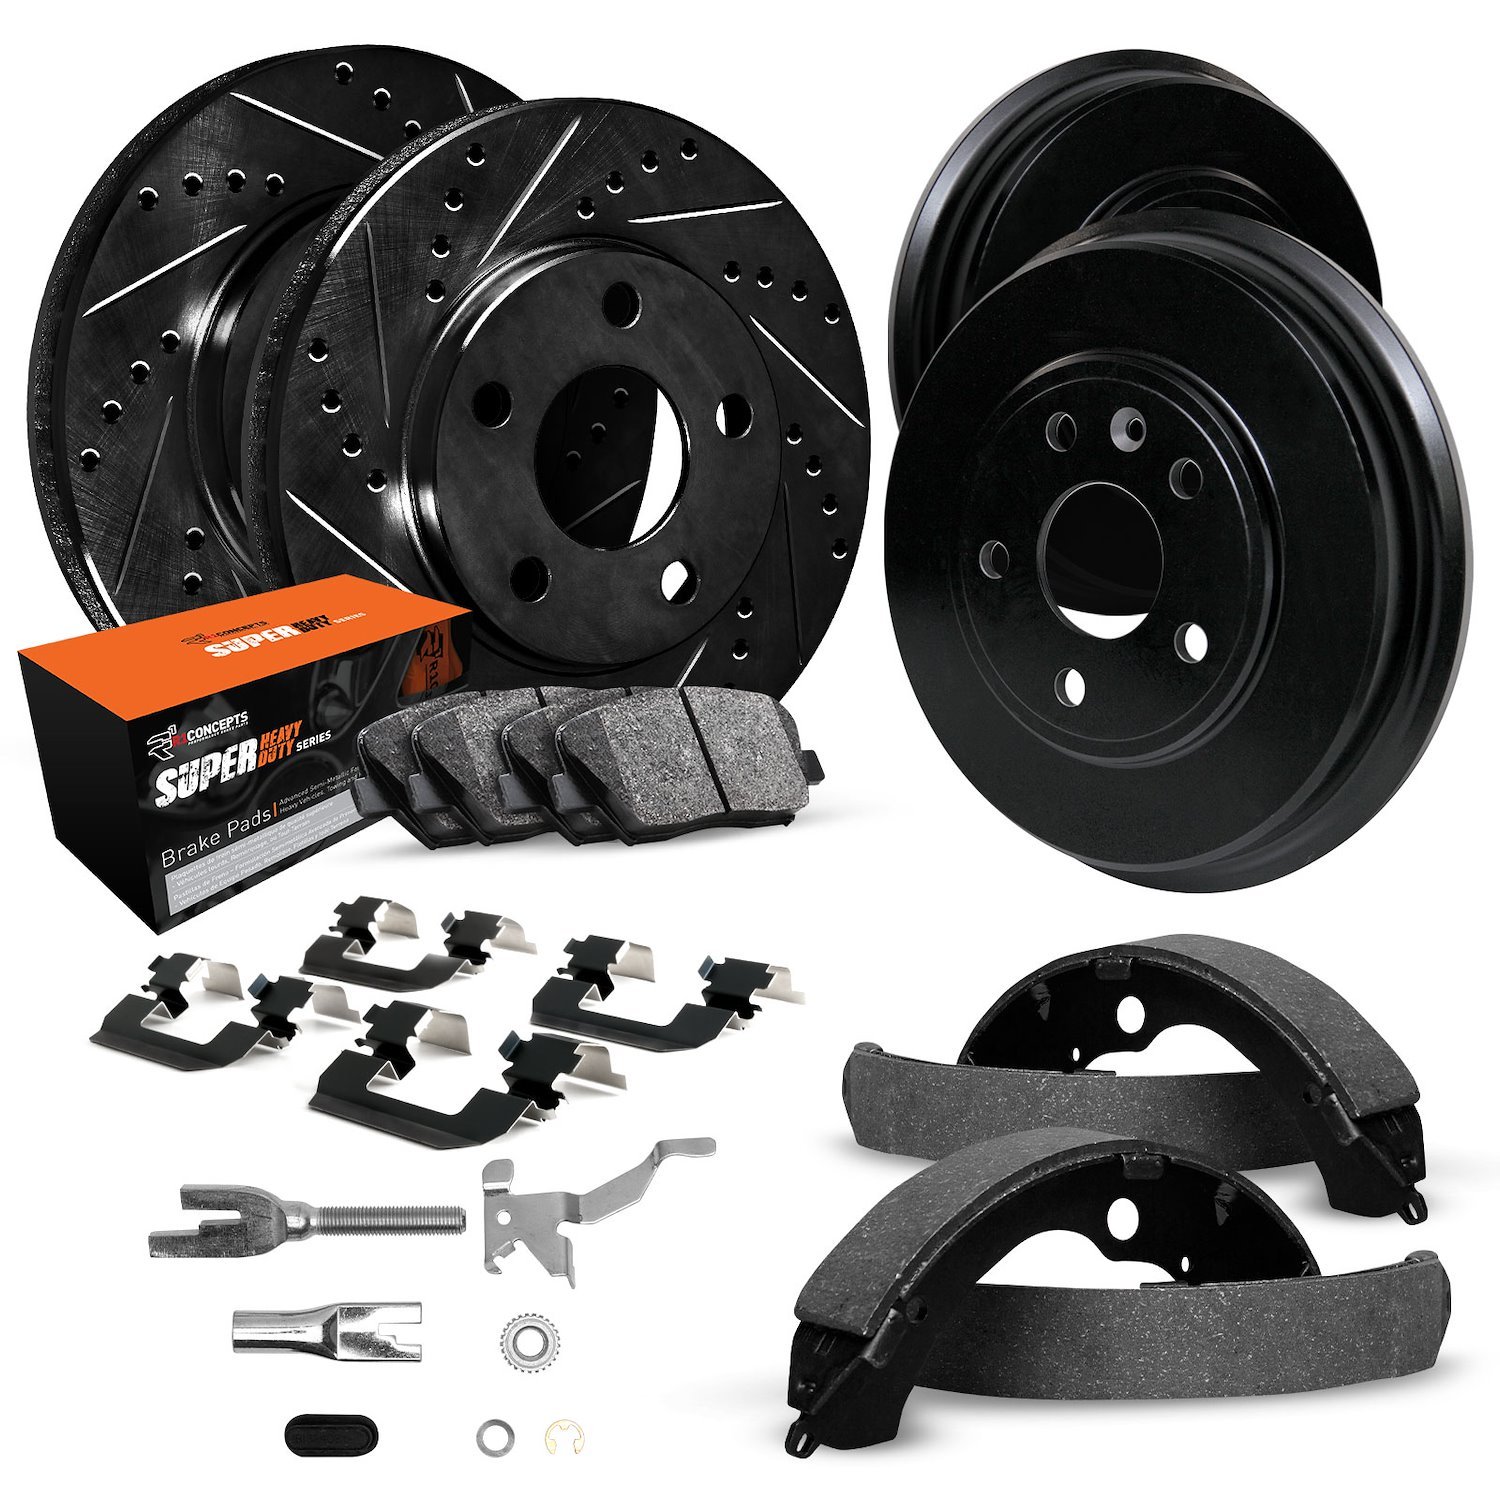 E-Line Drilled/Slotted Black Rotor & Drum Set w/Super-Duty Pads, Shoes, Hardware/Adjusters, 2002-2007 GM